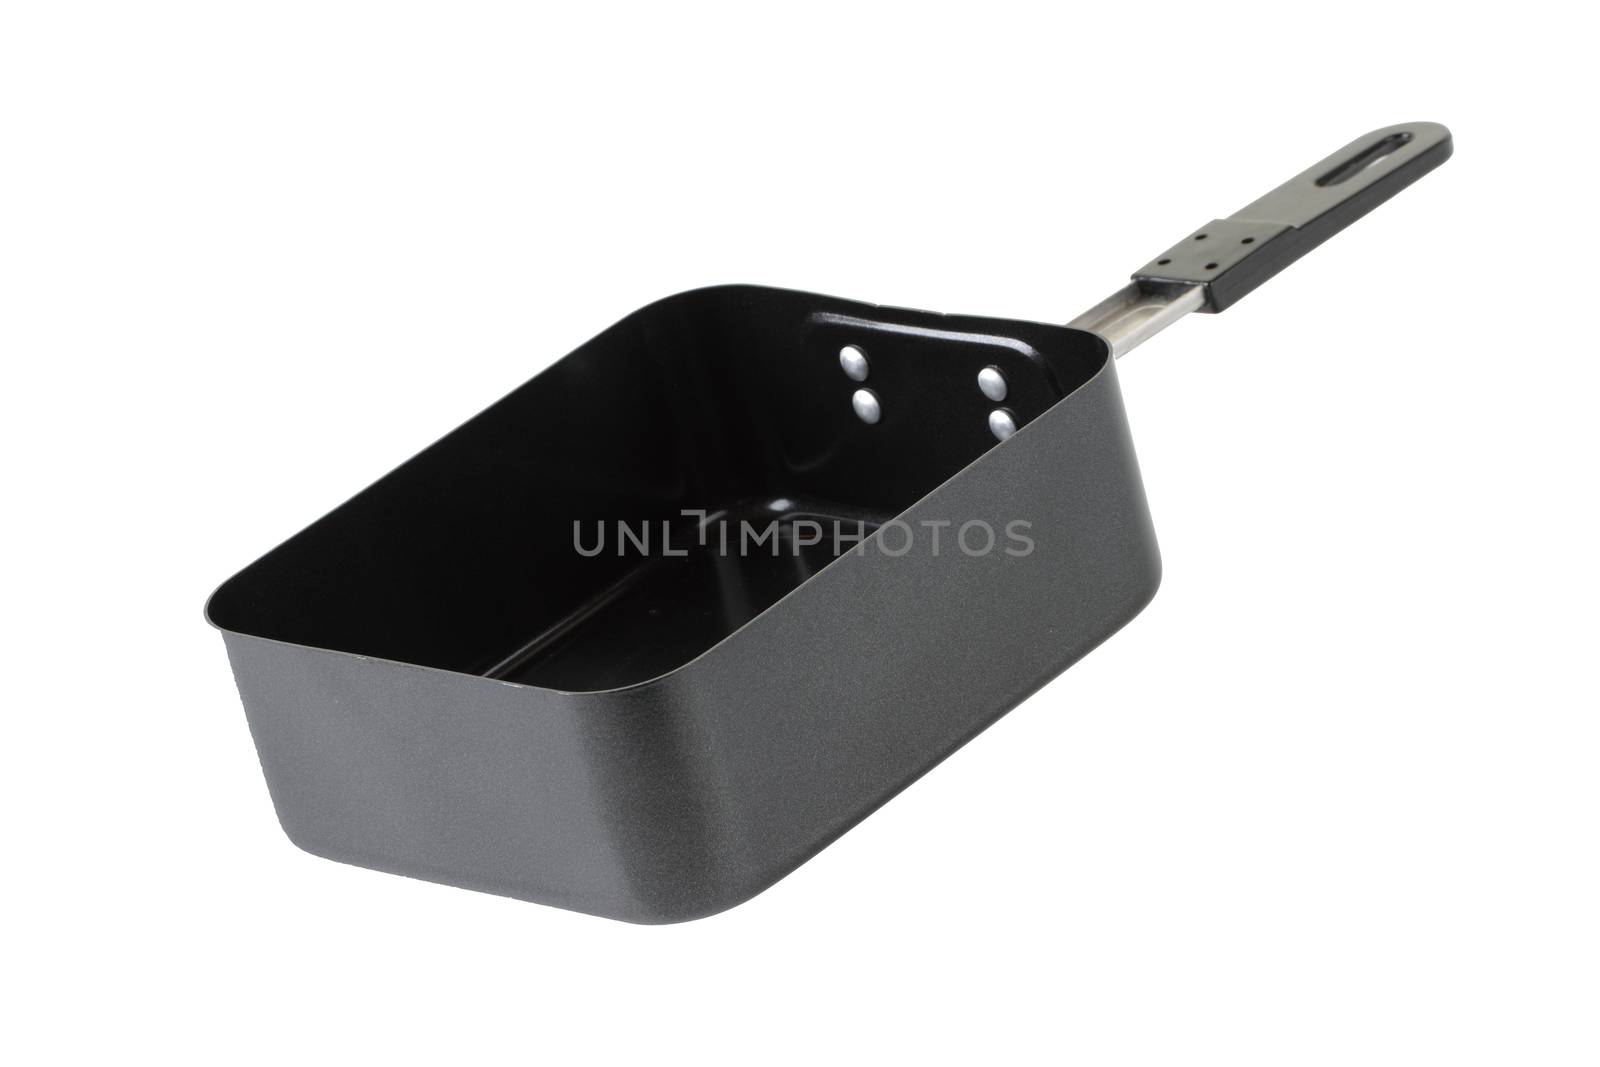 A mess tin rectangular metal dish with a folding handle forming part of a soldier's mess kit or for camping or hiking